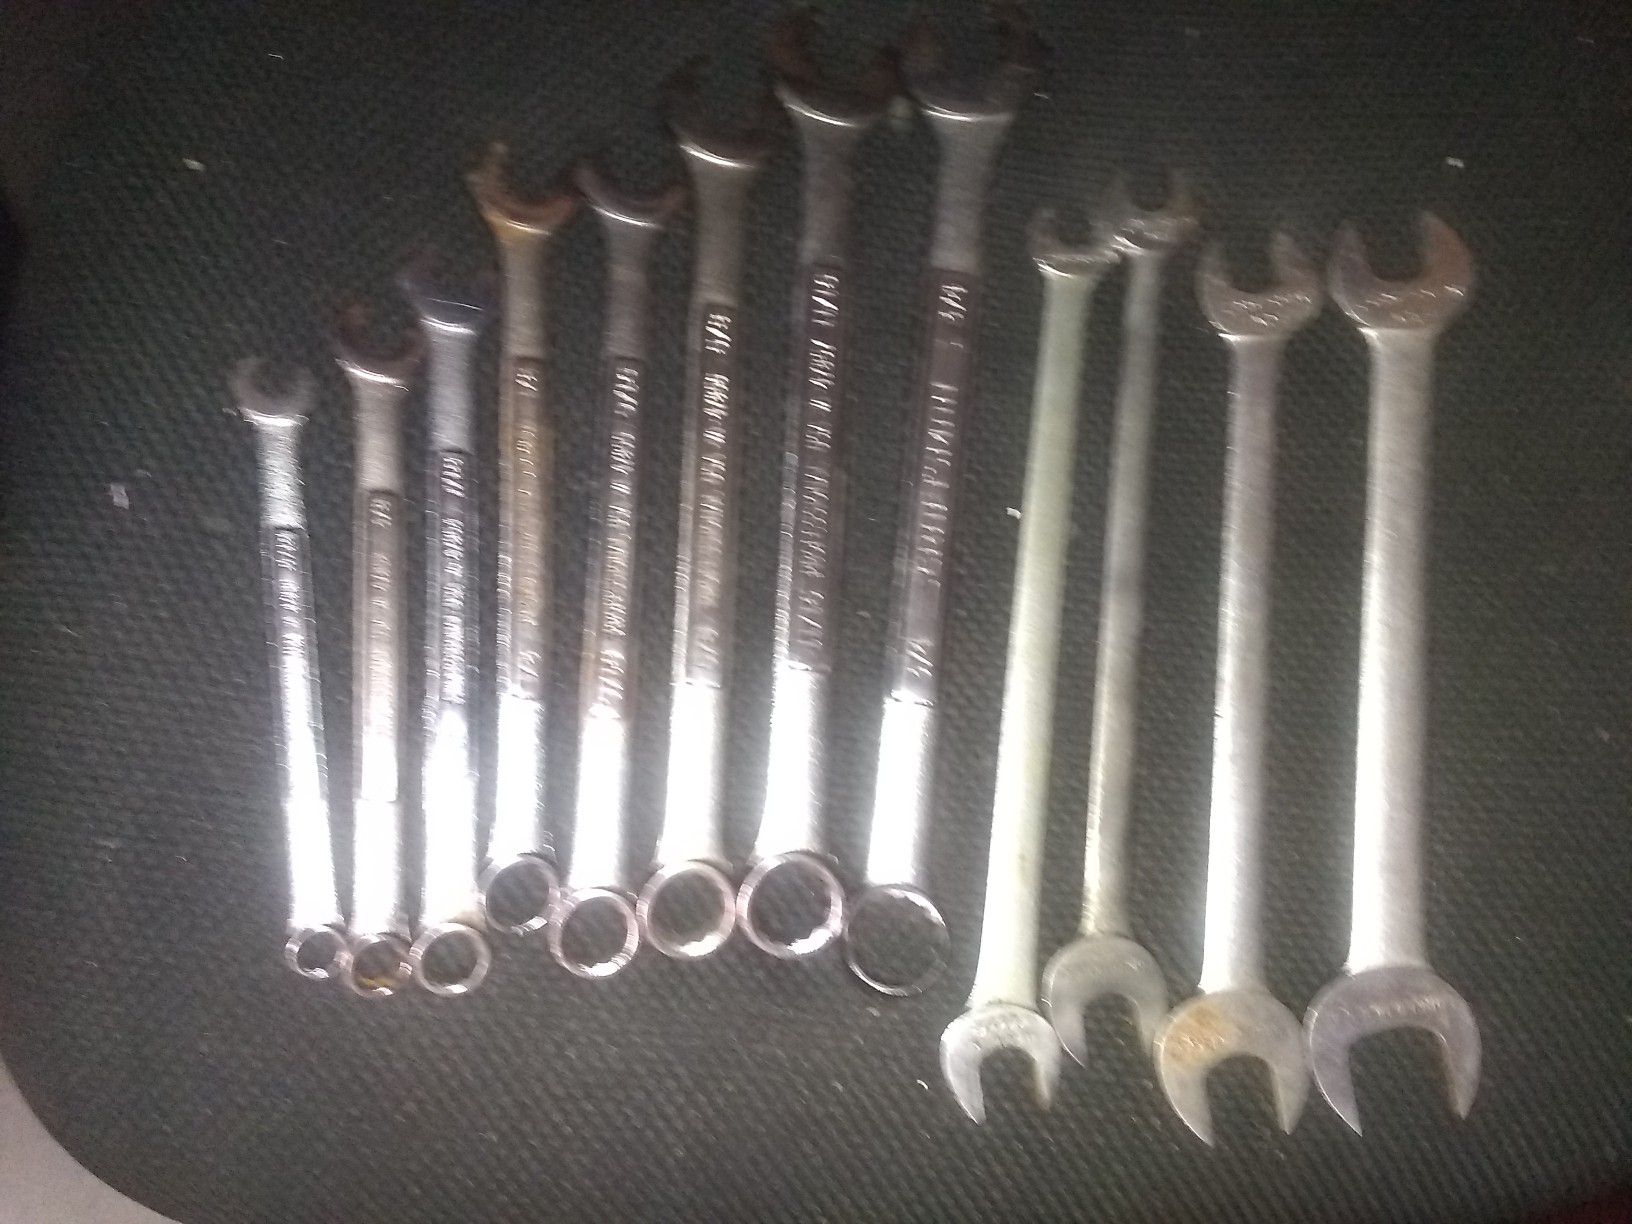 Craftsman wrenches all for$40